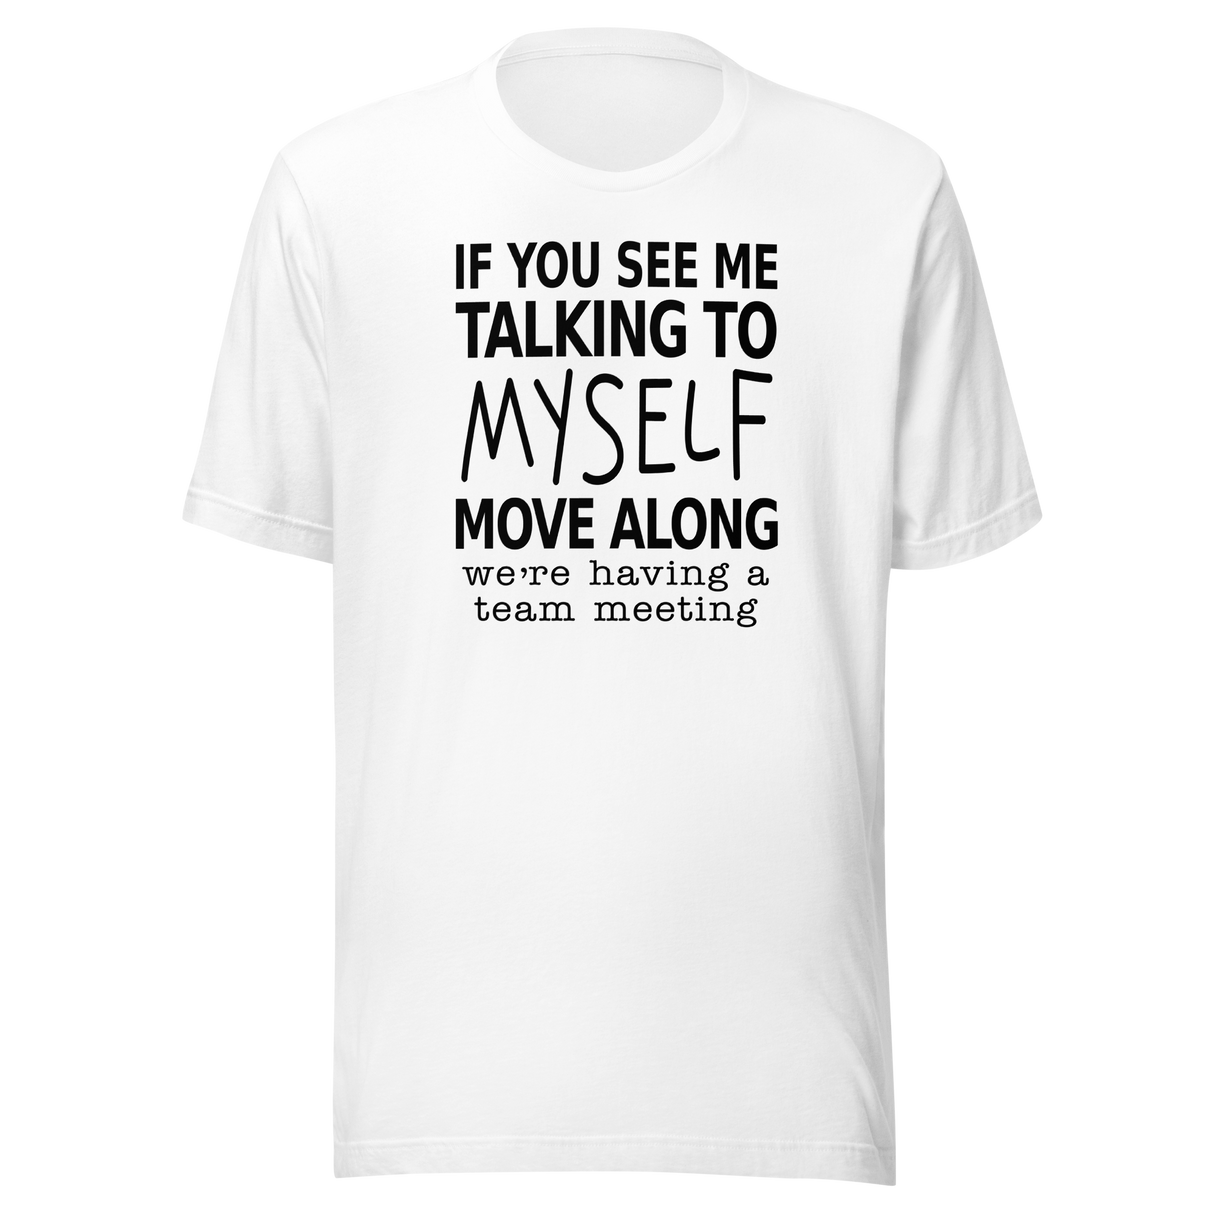 if-you-see-me-talking-to-myself-move-along-were-having-a-team-meeting-life-tee-funny-t-shirt-funny-tee-quirky-t-shirt-witty-tee#color_white